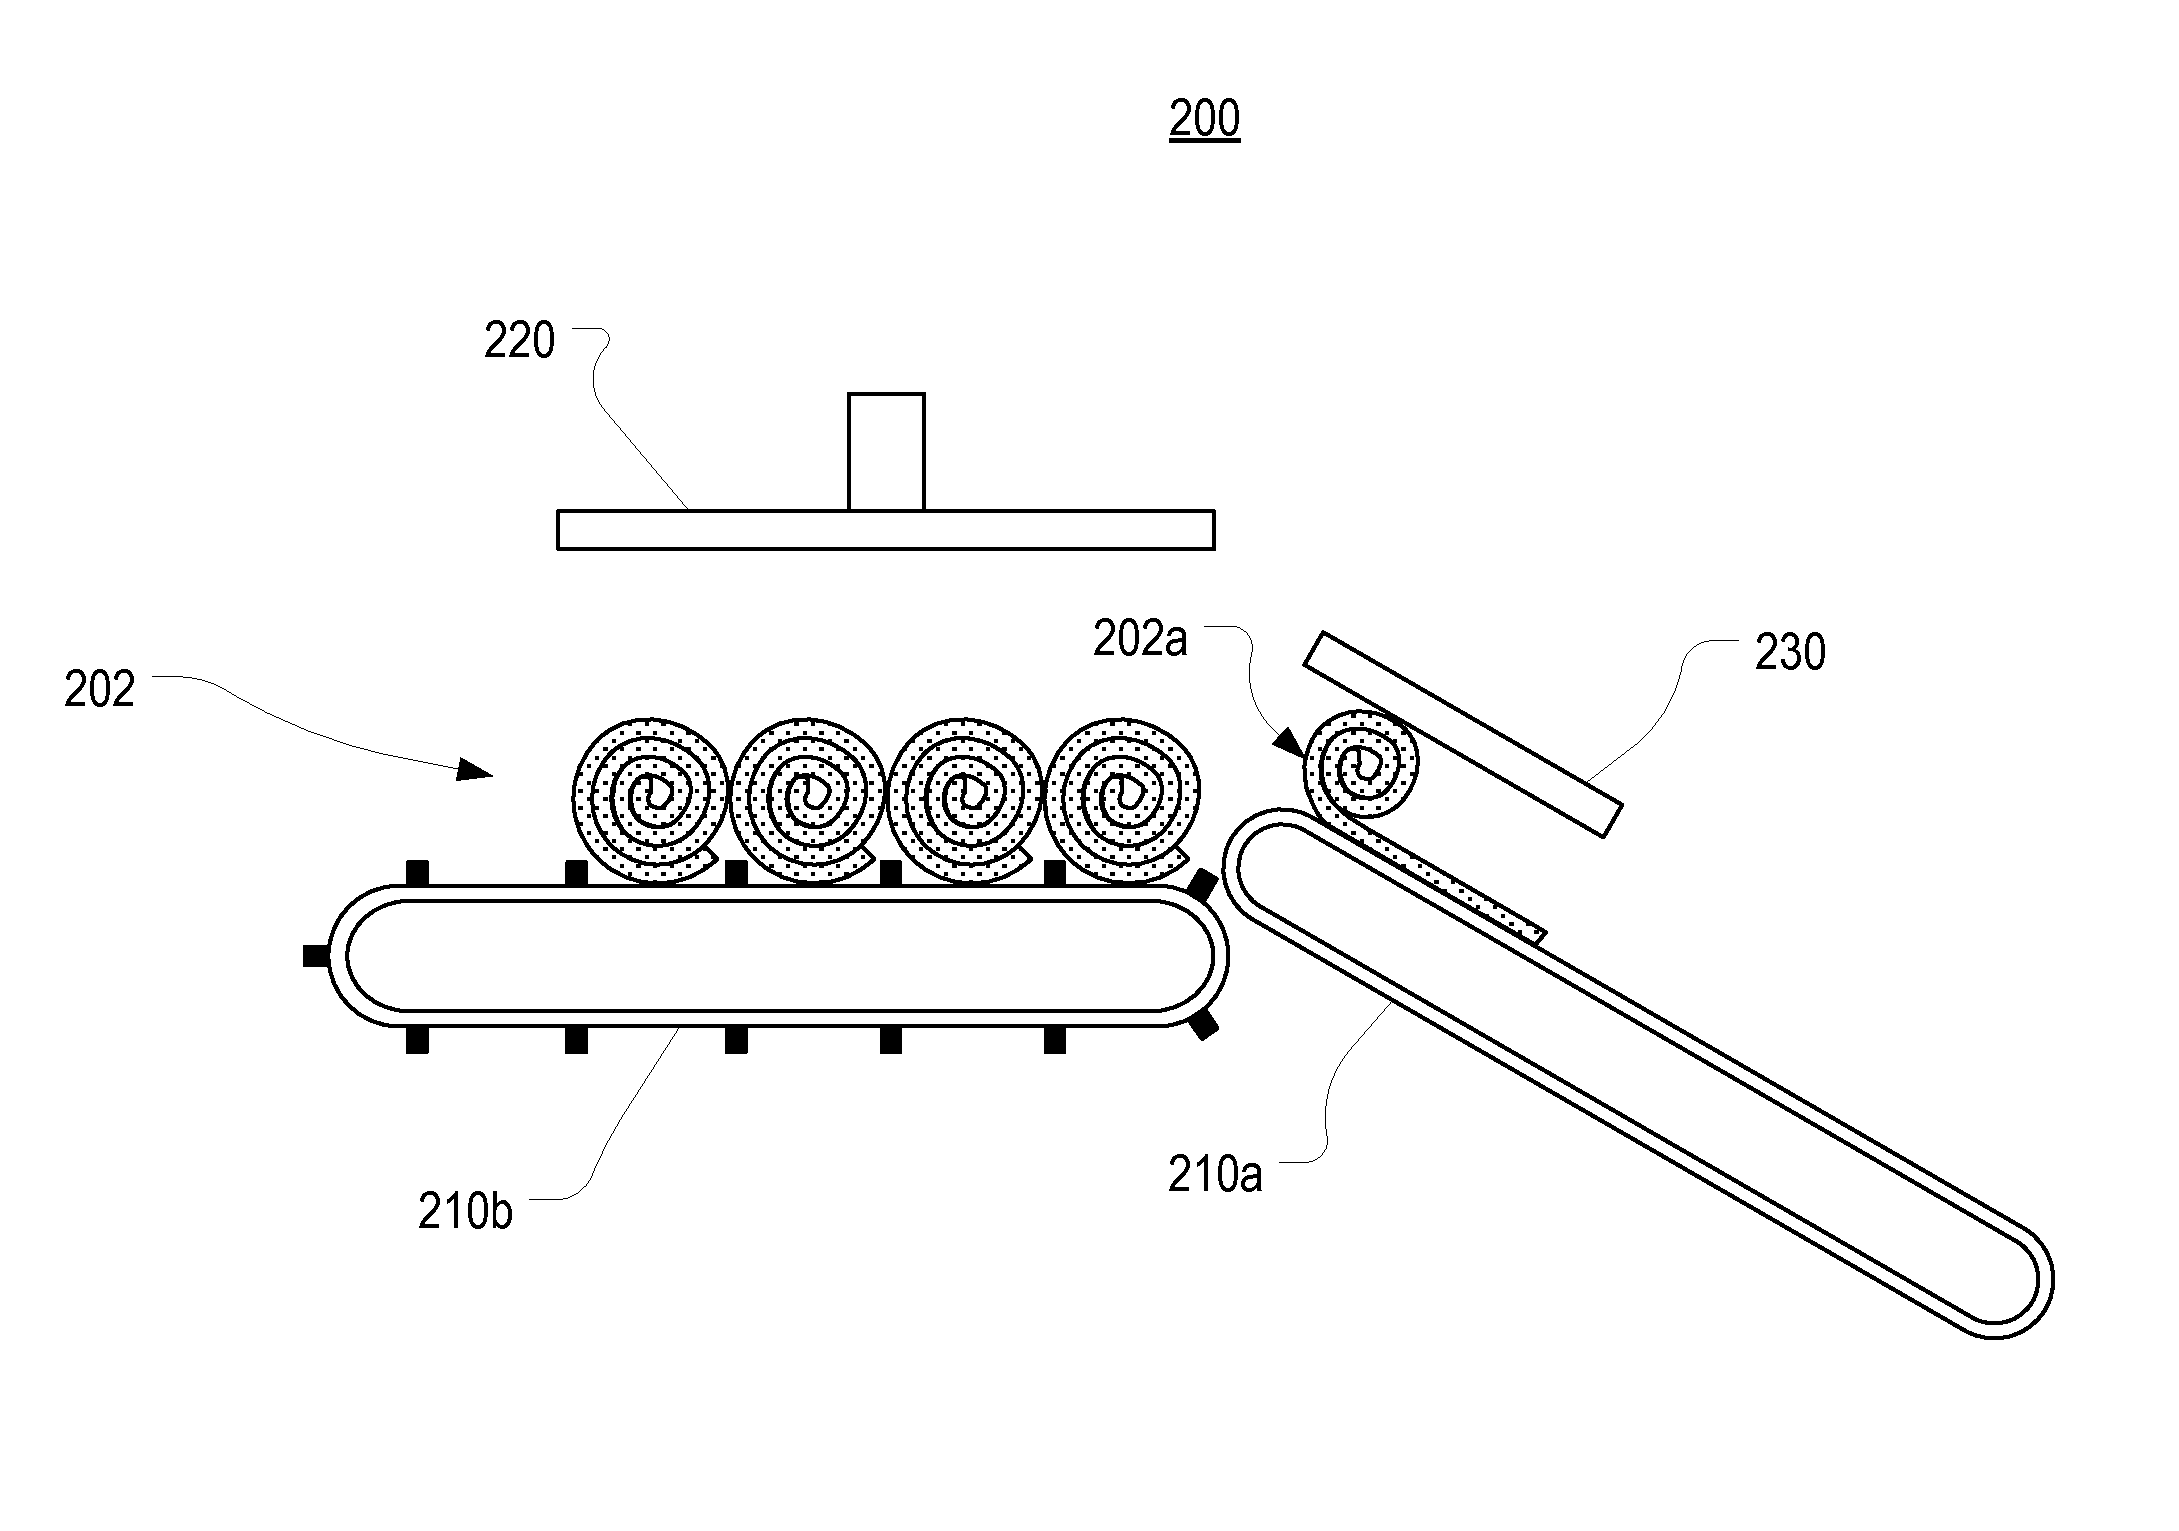 Sod harvester stacking head that is movable with a stacking conveyor